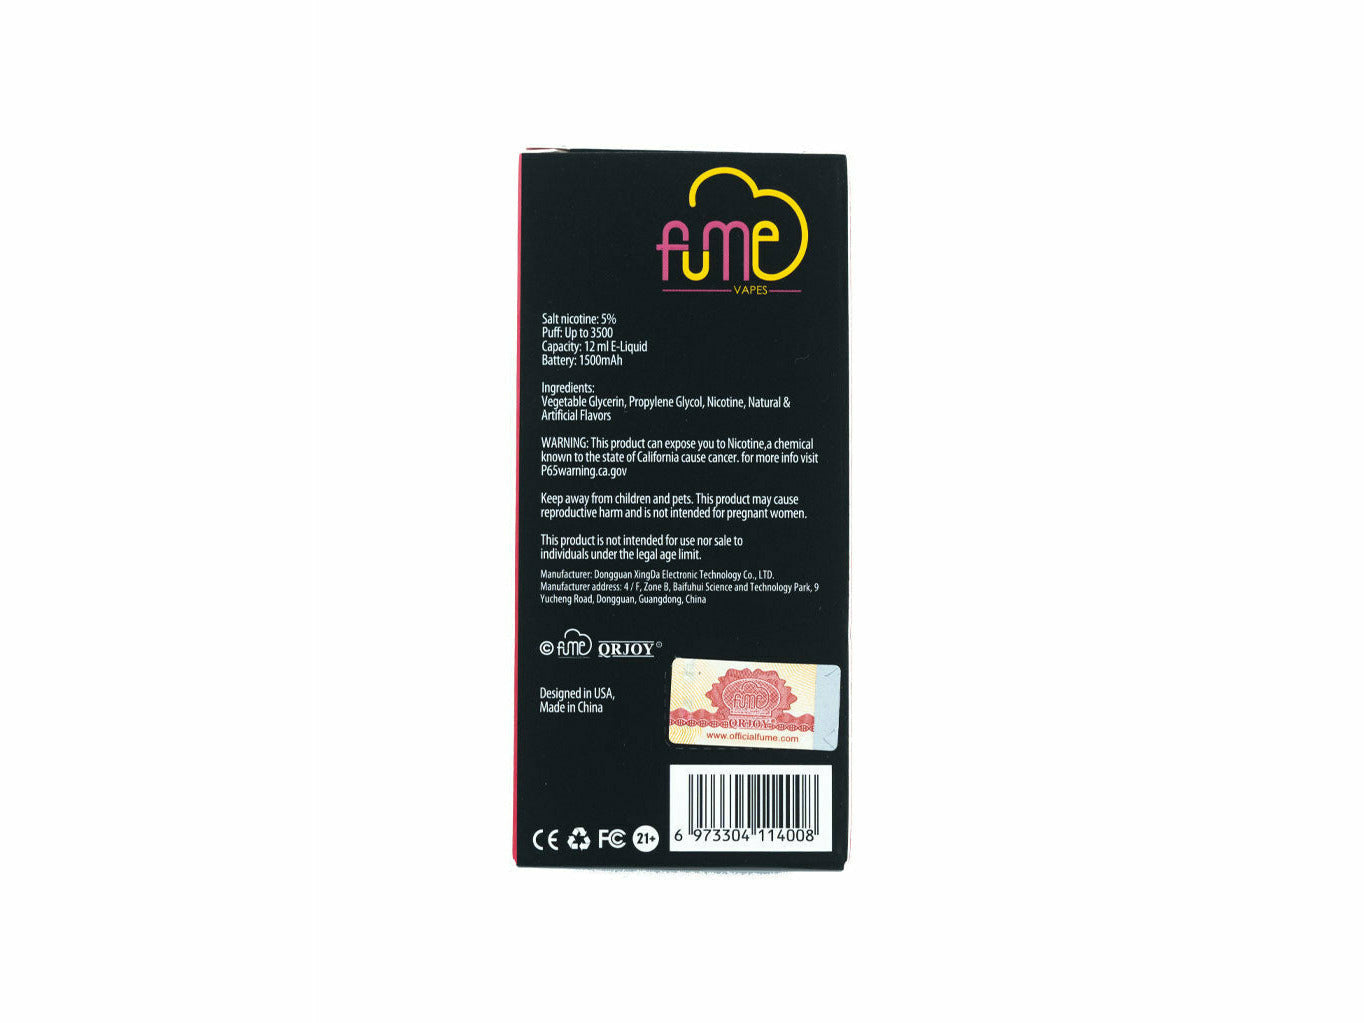 Fume Strawberry Banana Infinity disposable, back package description